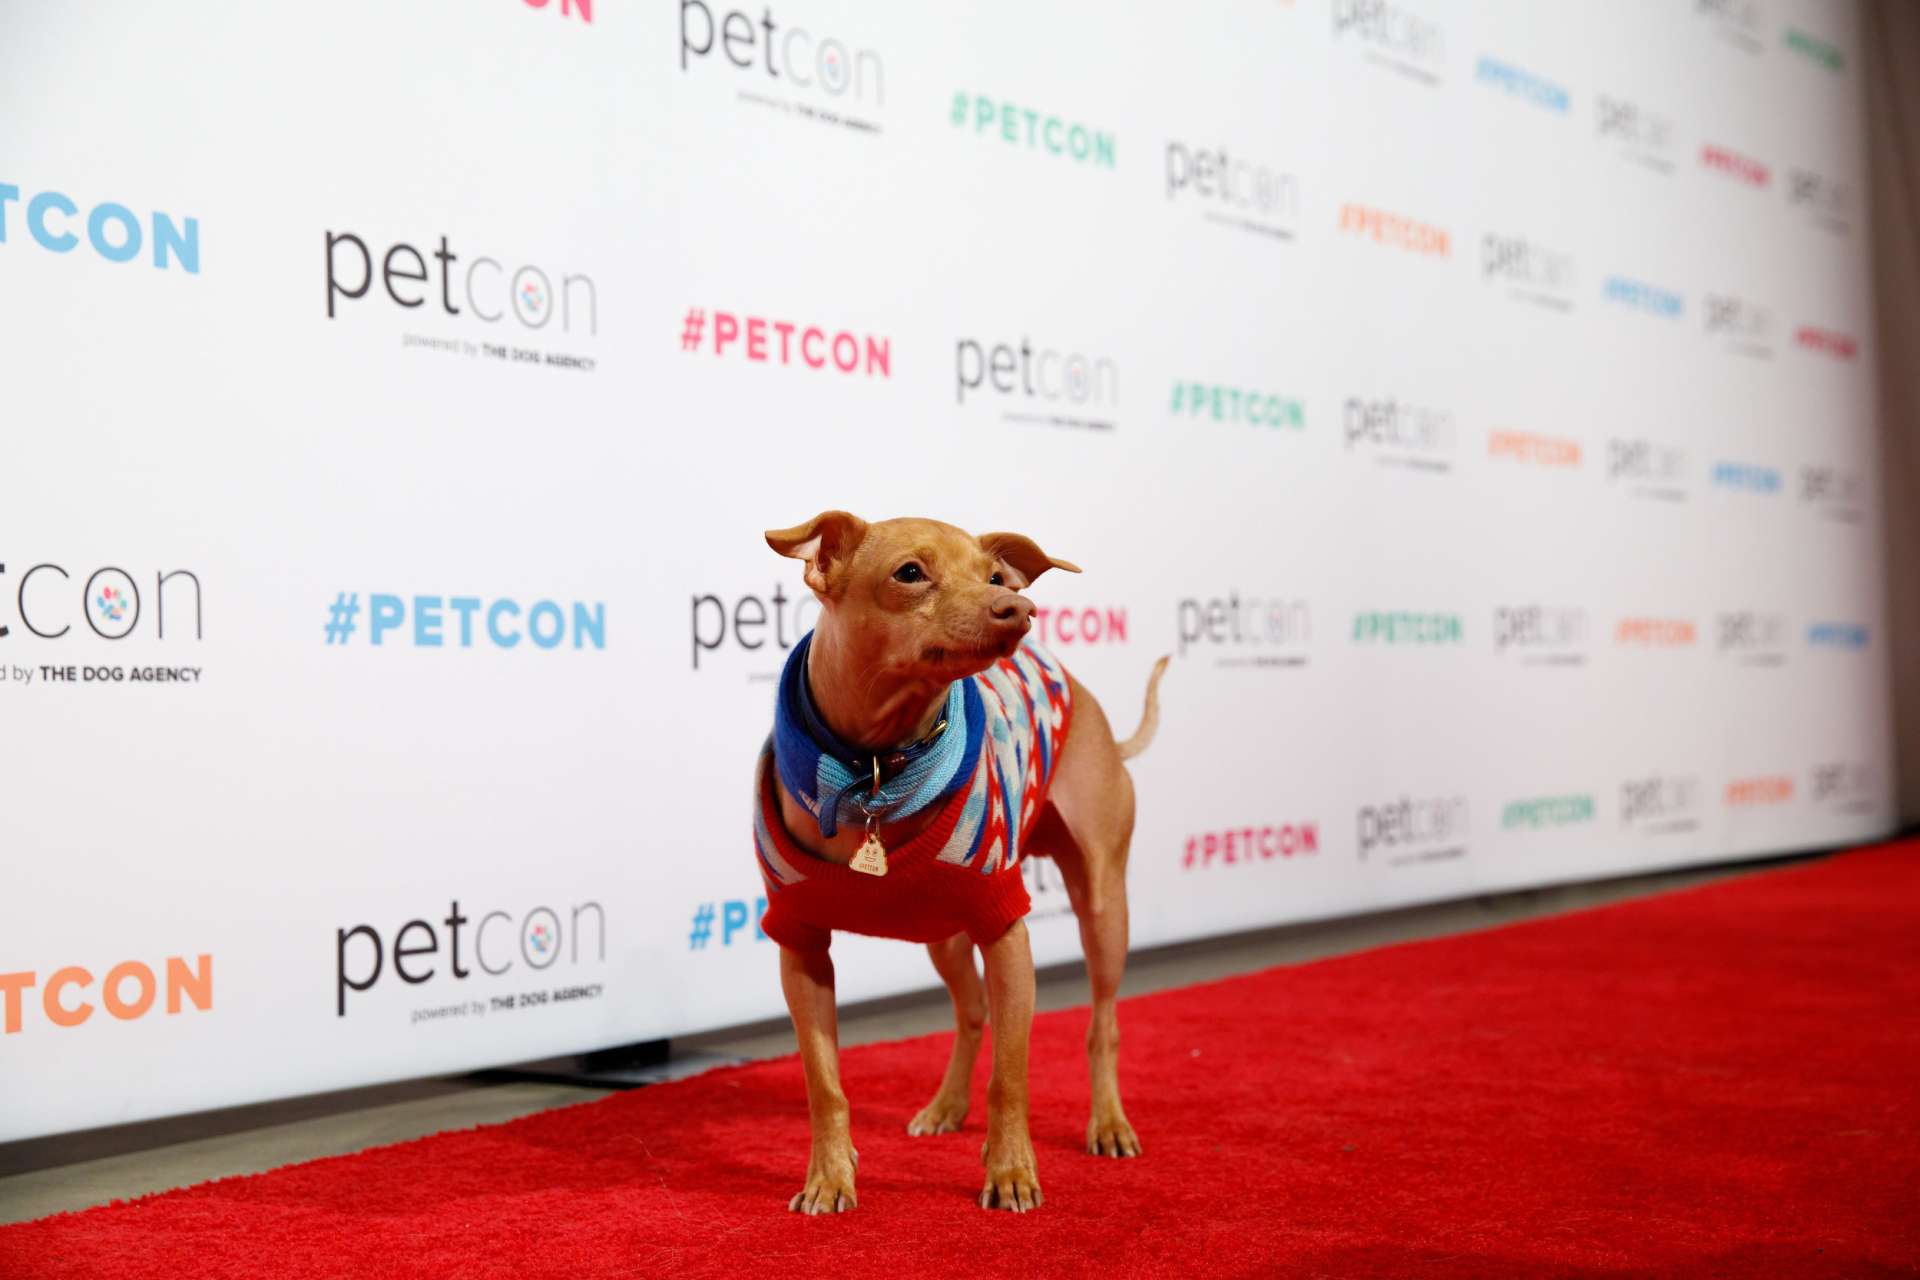 box of dreams photography for pet con 2023 banner image red carpet